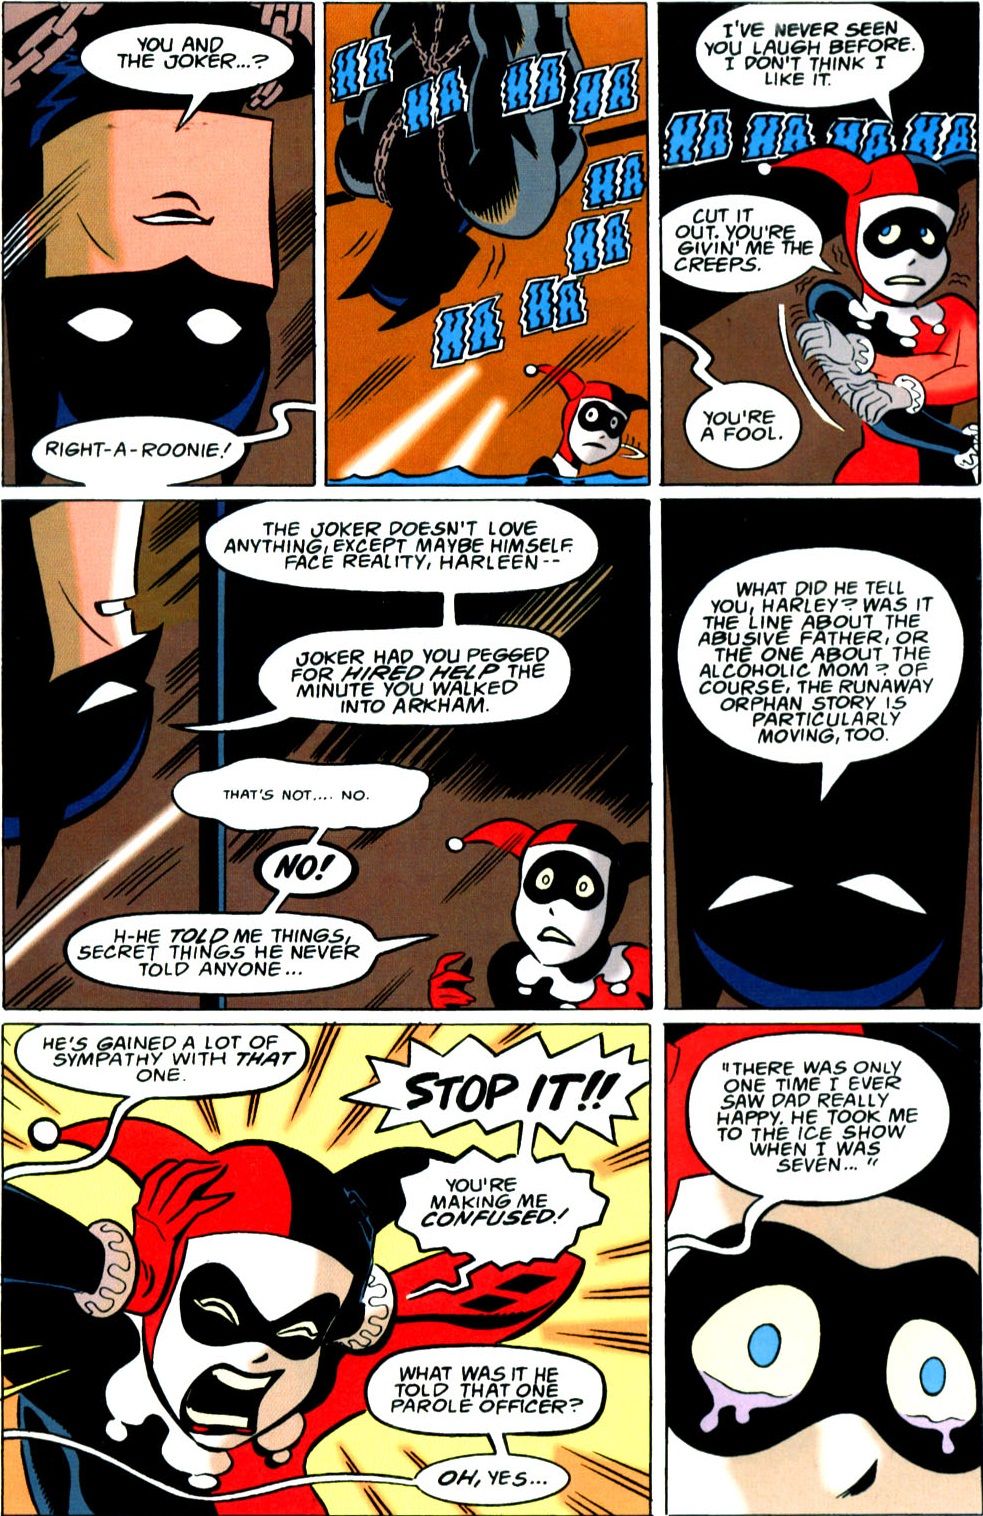 Batman messed with Harley's mind